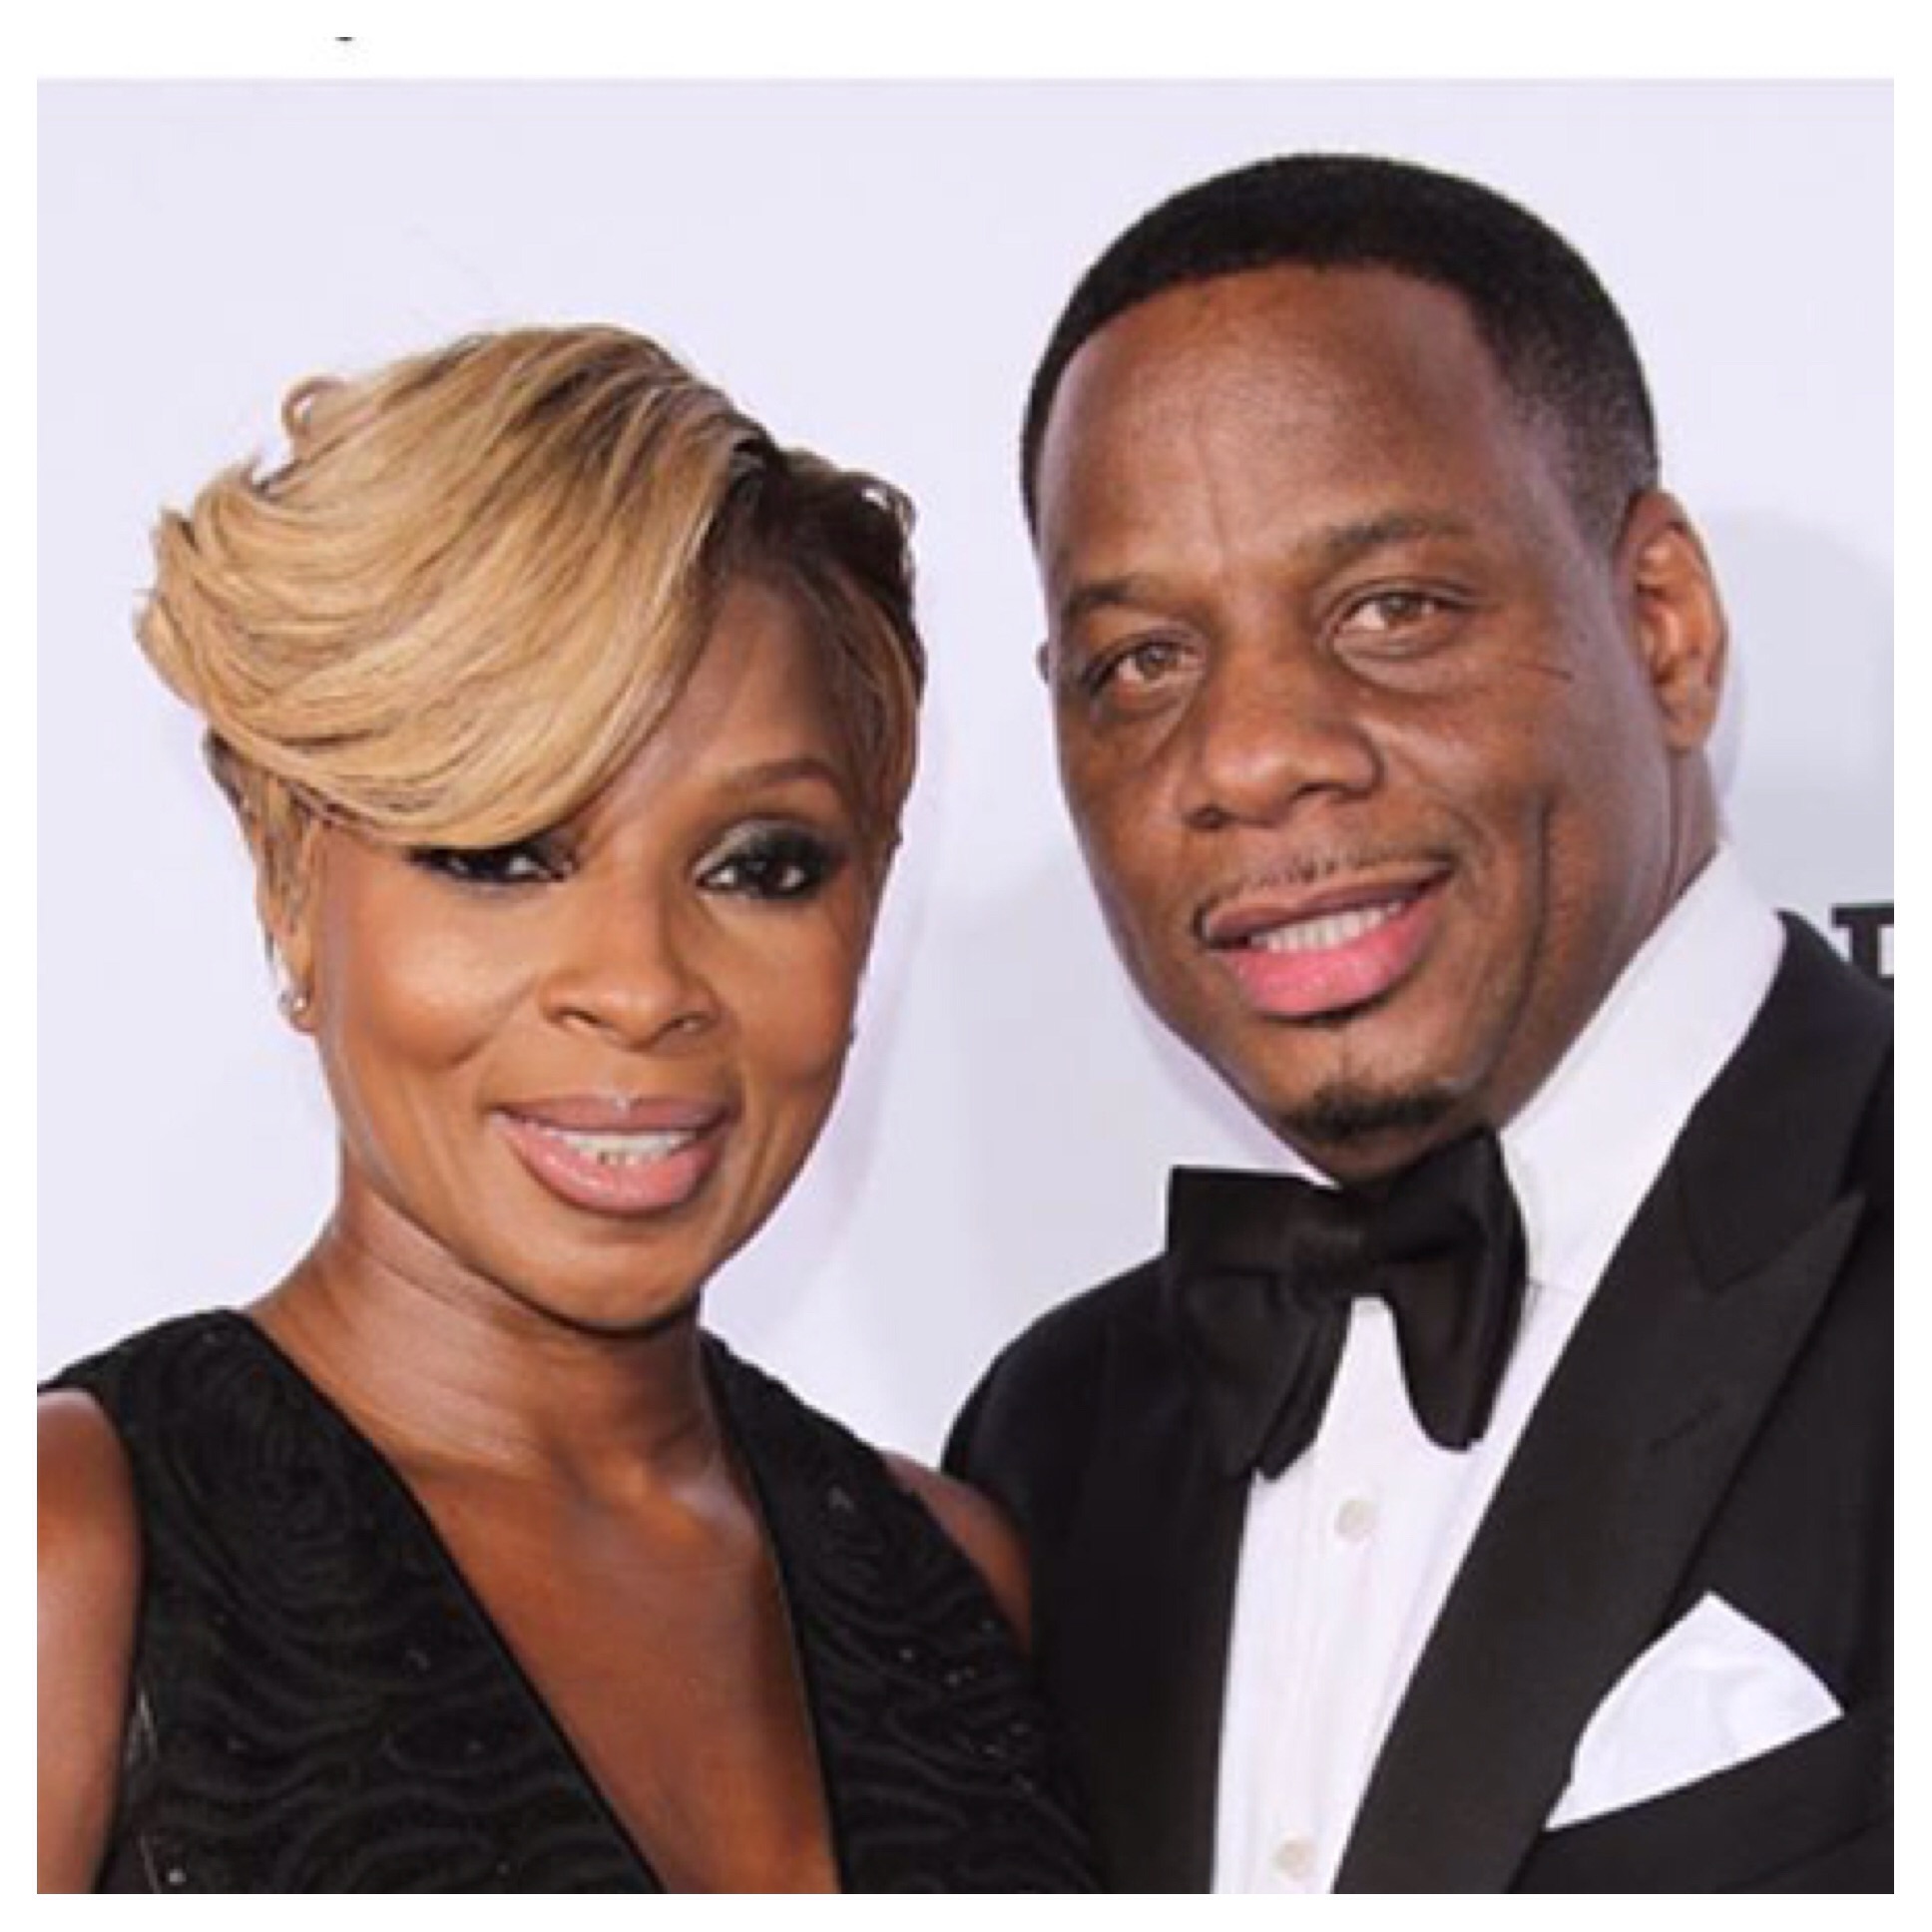 How Much More Does This Man Needs? Singer Mary J. Blige Says Estranged Hubby Won’t Return Luxury Cars And Grammy.